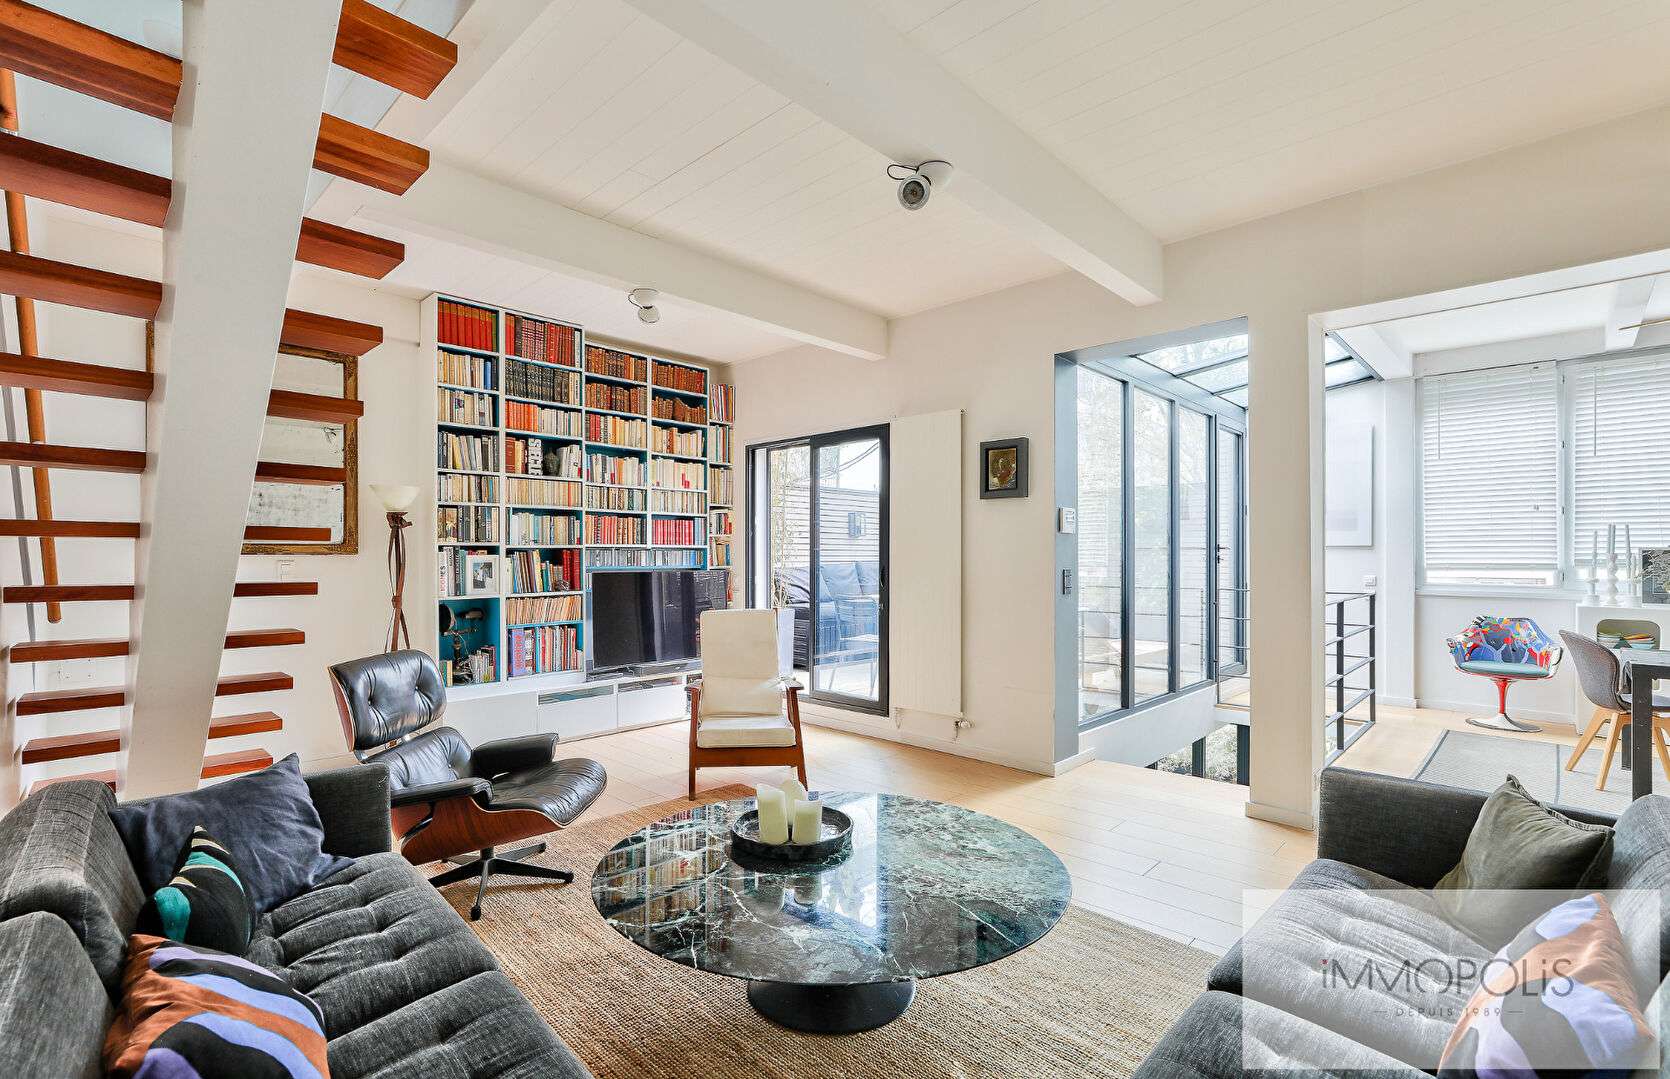 Off-Market: House with exceptional services in Saint Ouen sur Seine, 6 rooms, large reception, 1 interior courtyard and 1 terrace 1